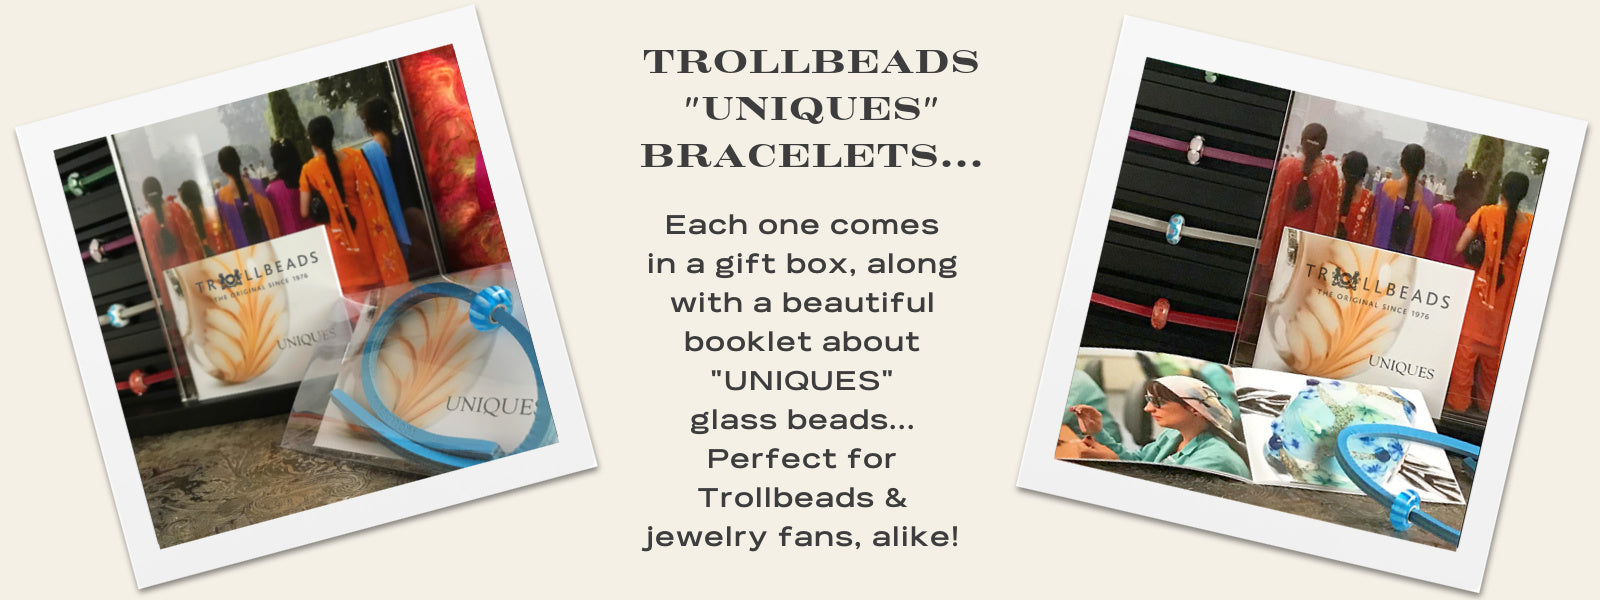 Trollbeads UNIQUES are one-of-a-kind glass beads handmade individually by 100% artisan-owned workshops in Tibet, India, Malawi and Lithuania. The one-of-a-kind UNIQUES glass beads offered at Suzie Q Studio also include a colour-coordinated leather bracelet. They’re great layered on your wrist and make wonderful gifts!